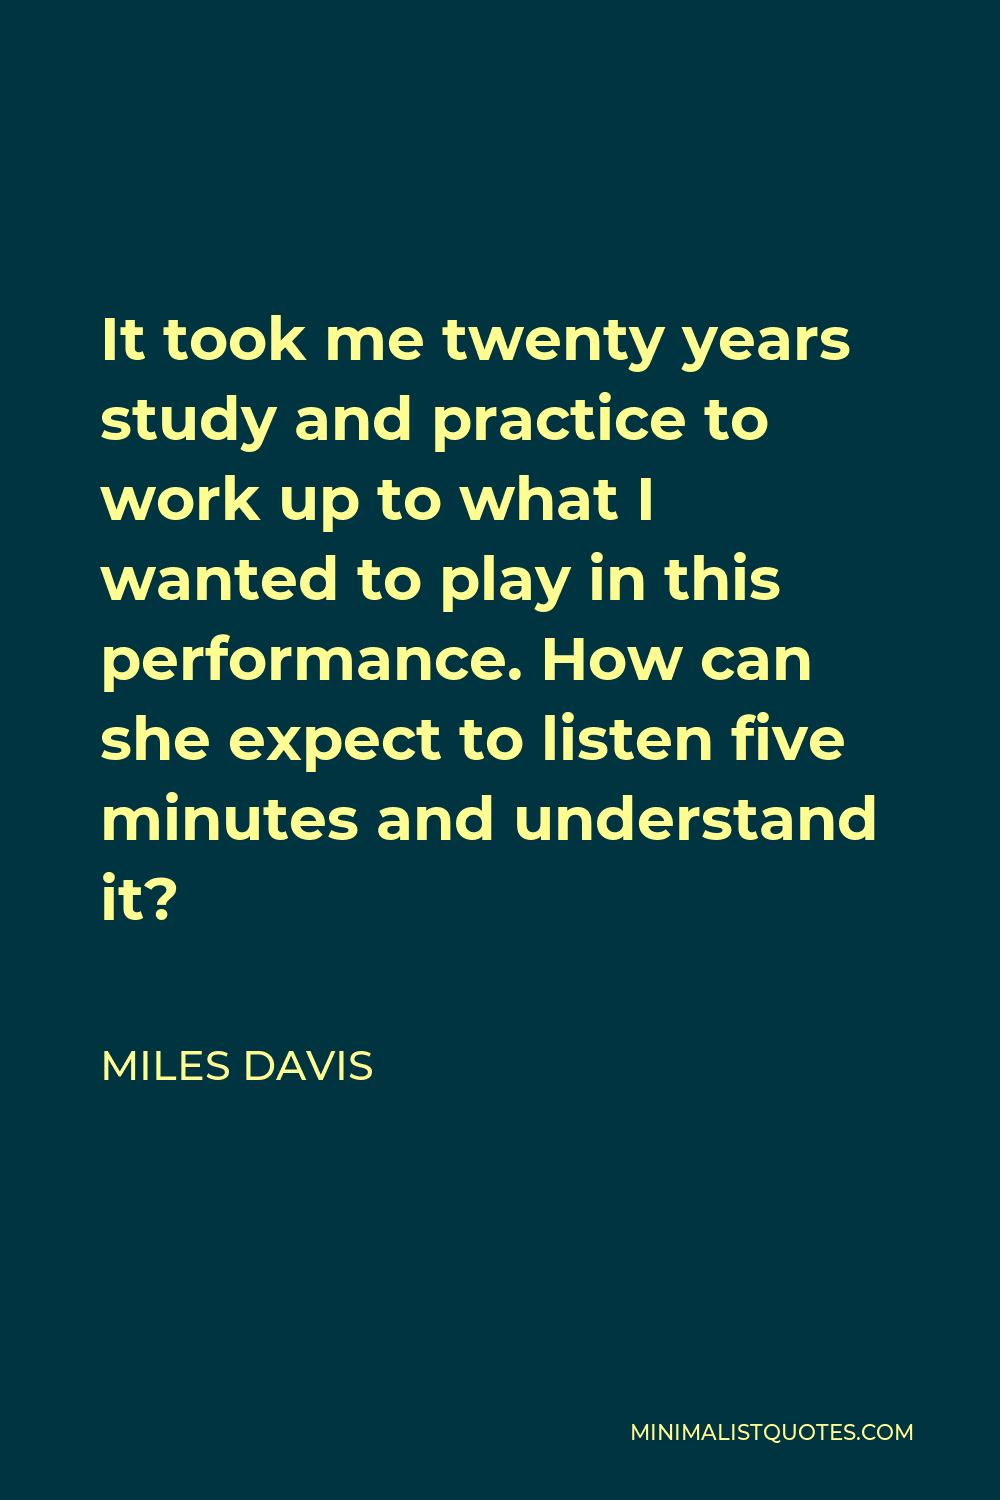 Miles Davis Quote - It took me twenty years study and practice to work up to what I wanted to play in this performance. How can she expect to listen five minutes and understand it?